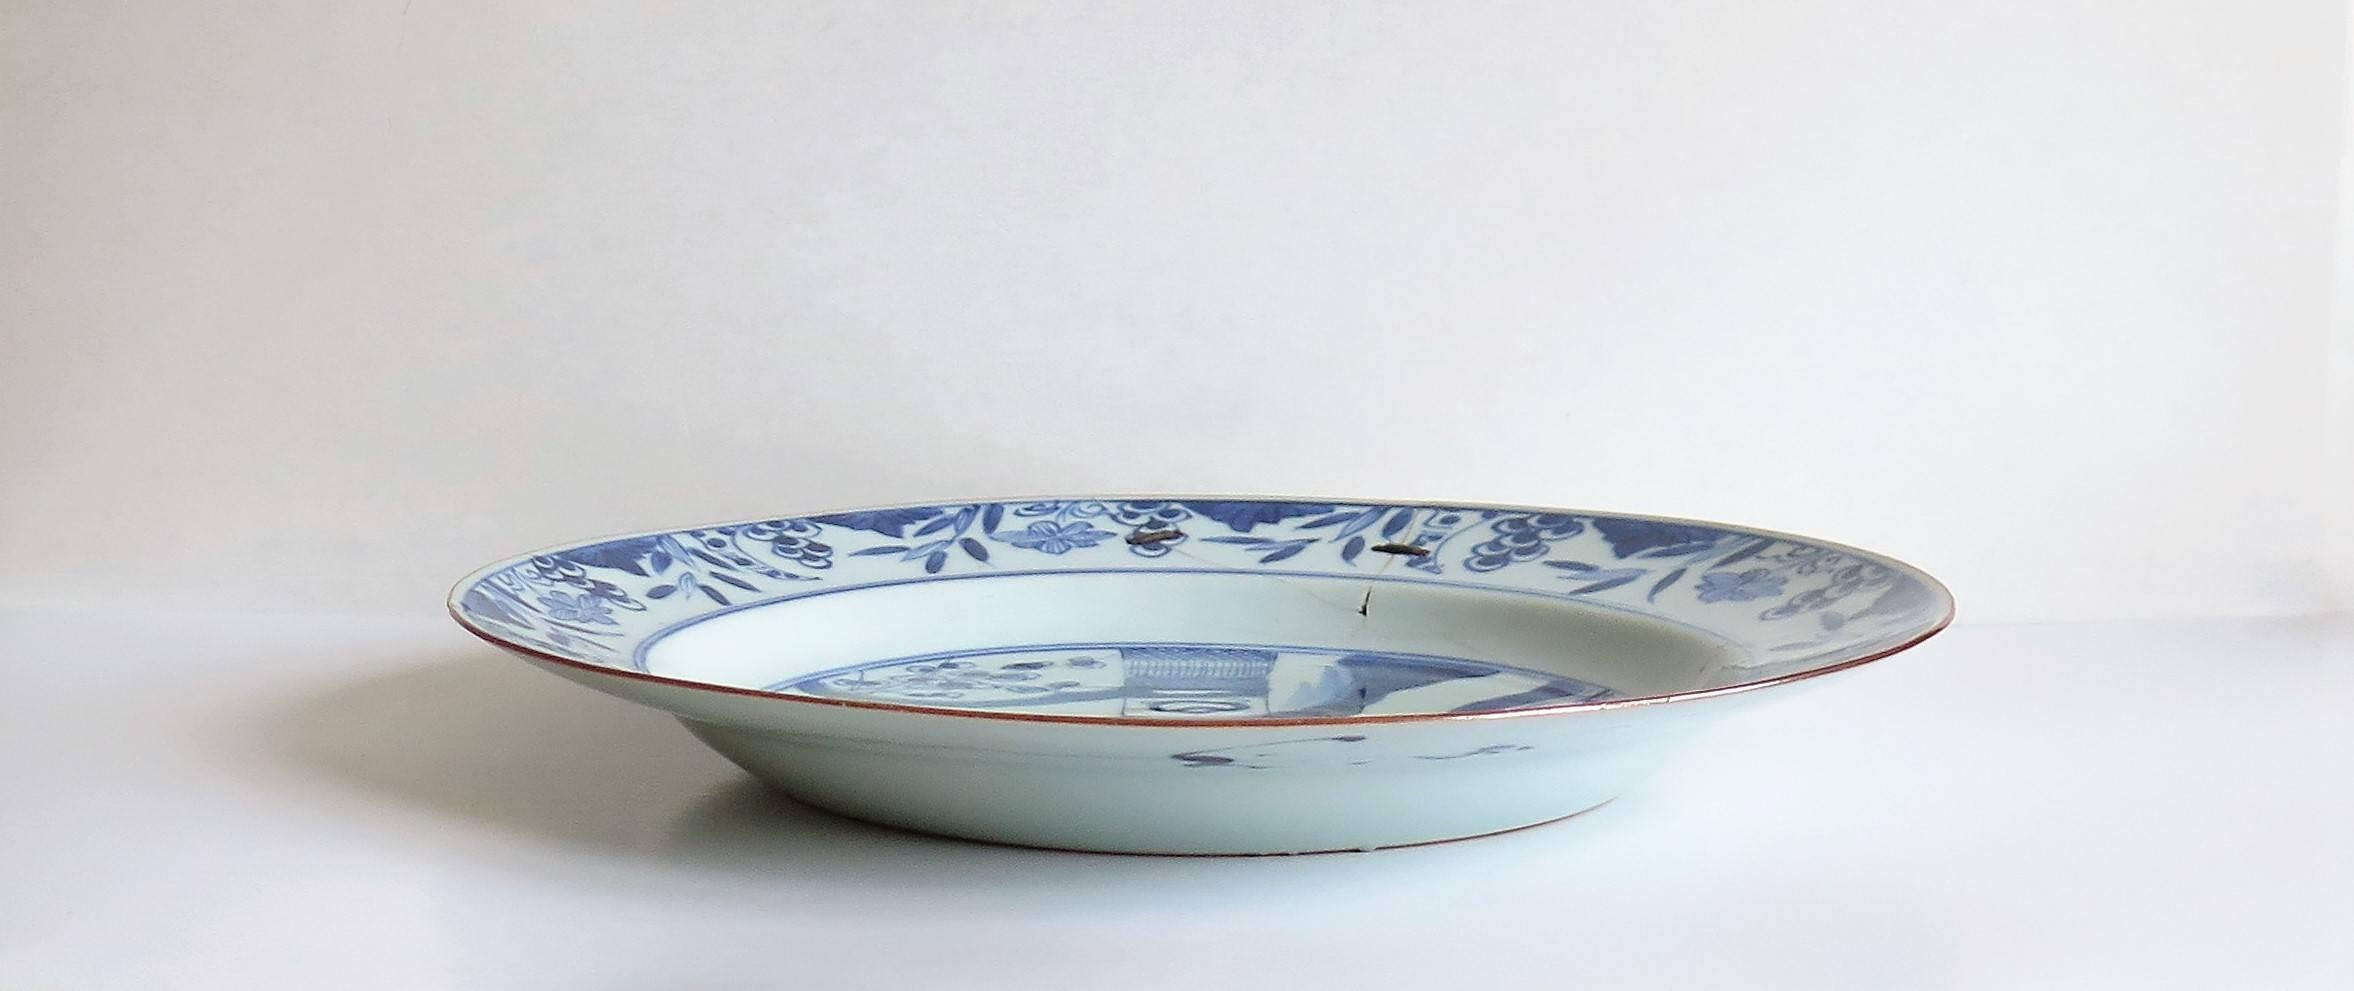 Large 18thC. Chinese Plate Porcelain Blue and White Rivet Repair, Qing Ca. 1720 1